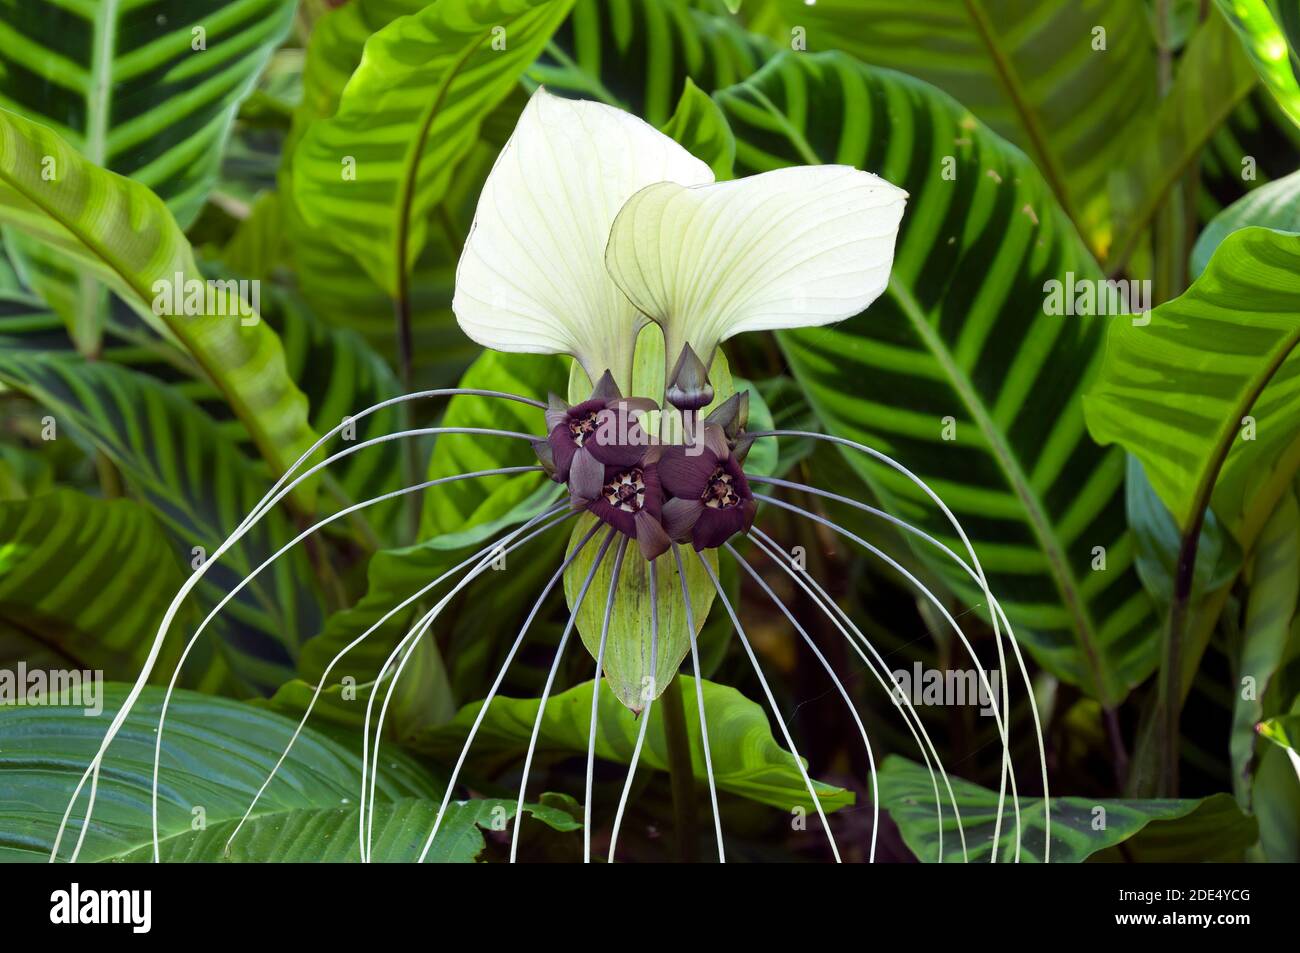 Sydney Australia, unusual flower of a tacca integrifolia or white batflower, native to tropical and subtropical rainforests of Central Asia Stock Photo